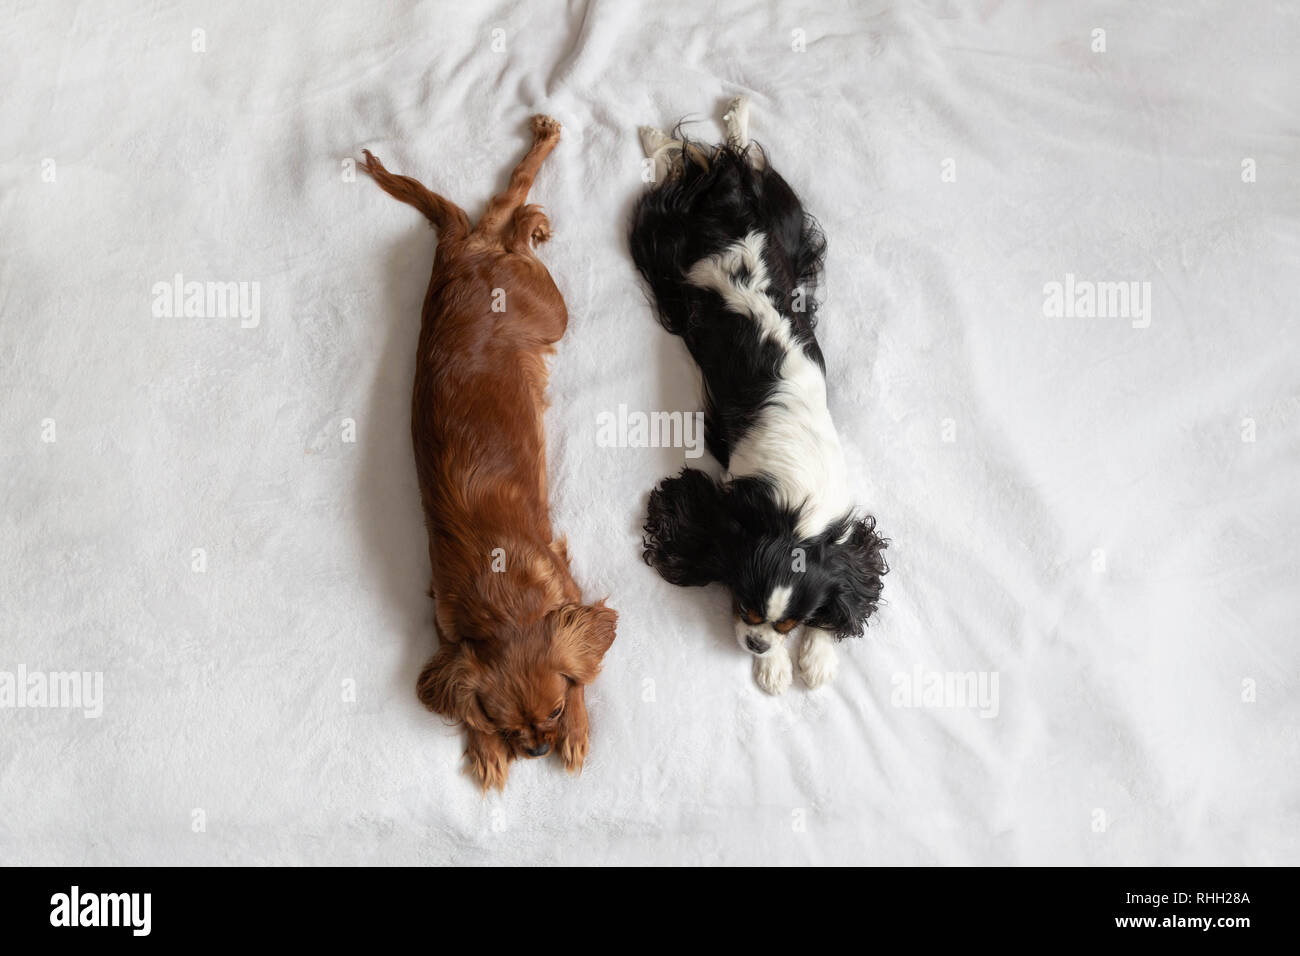 Two dogs sleeping togehter on the white blanket, top view Stock Photo